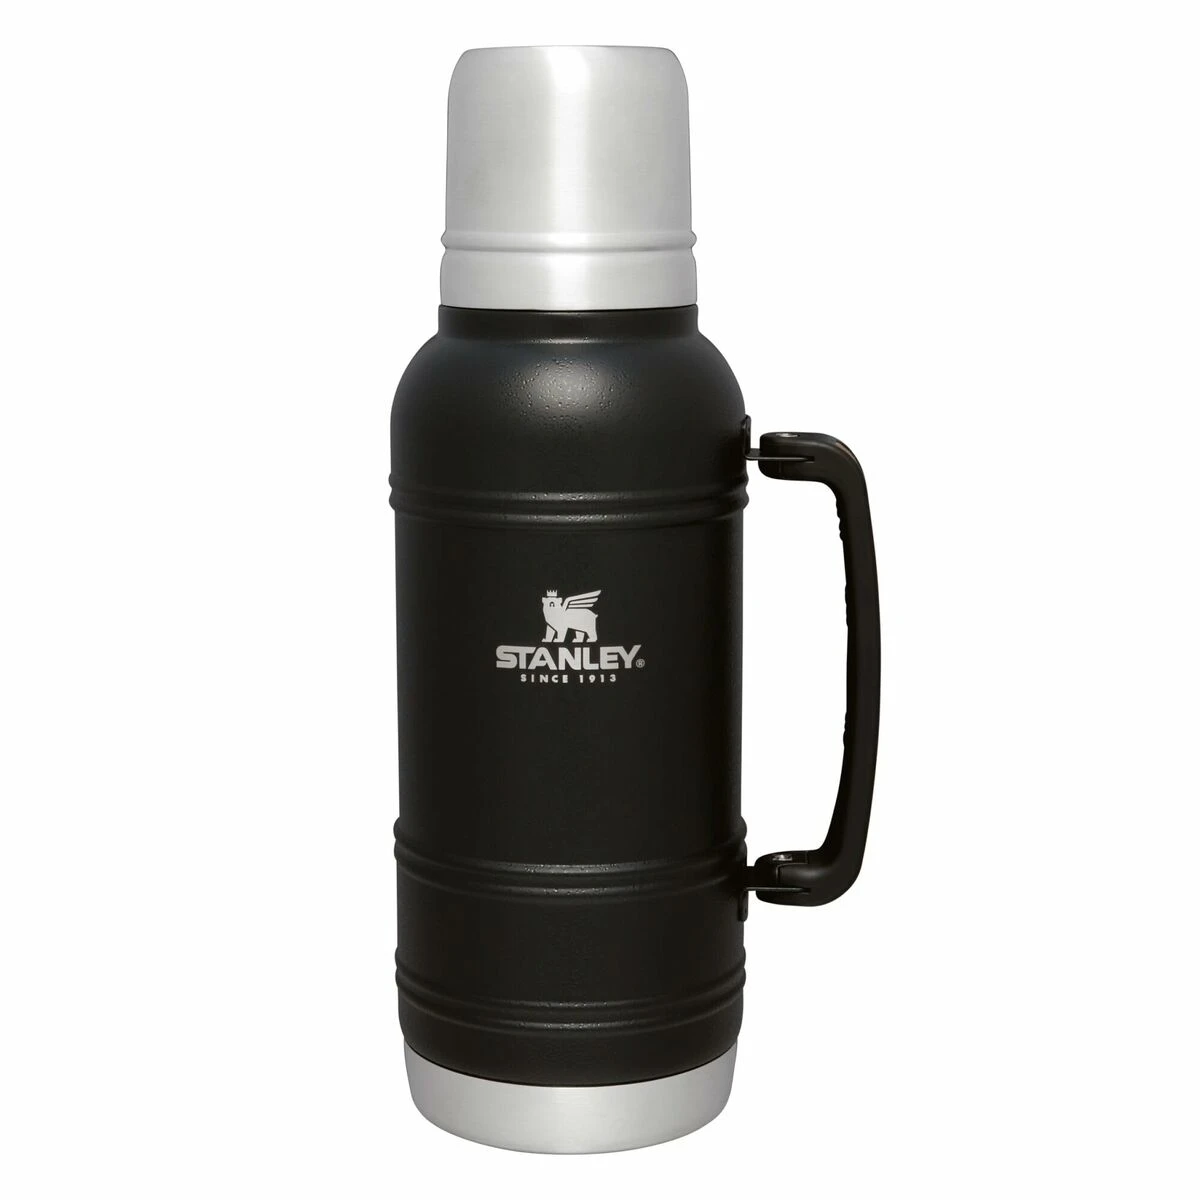 Black Stanley thermos with handle and cap